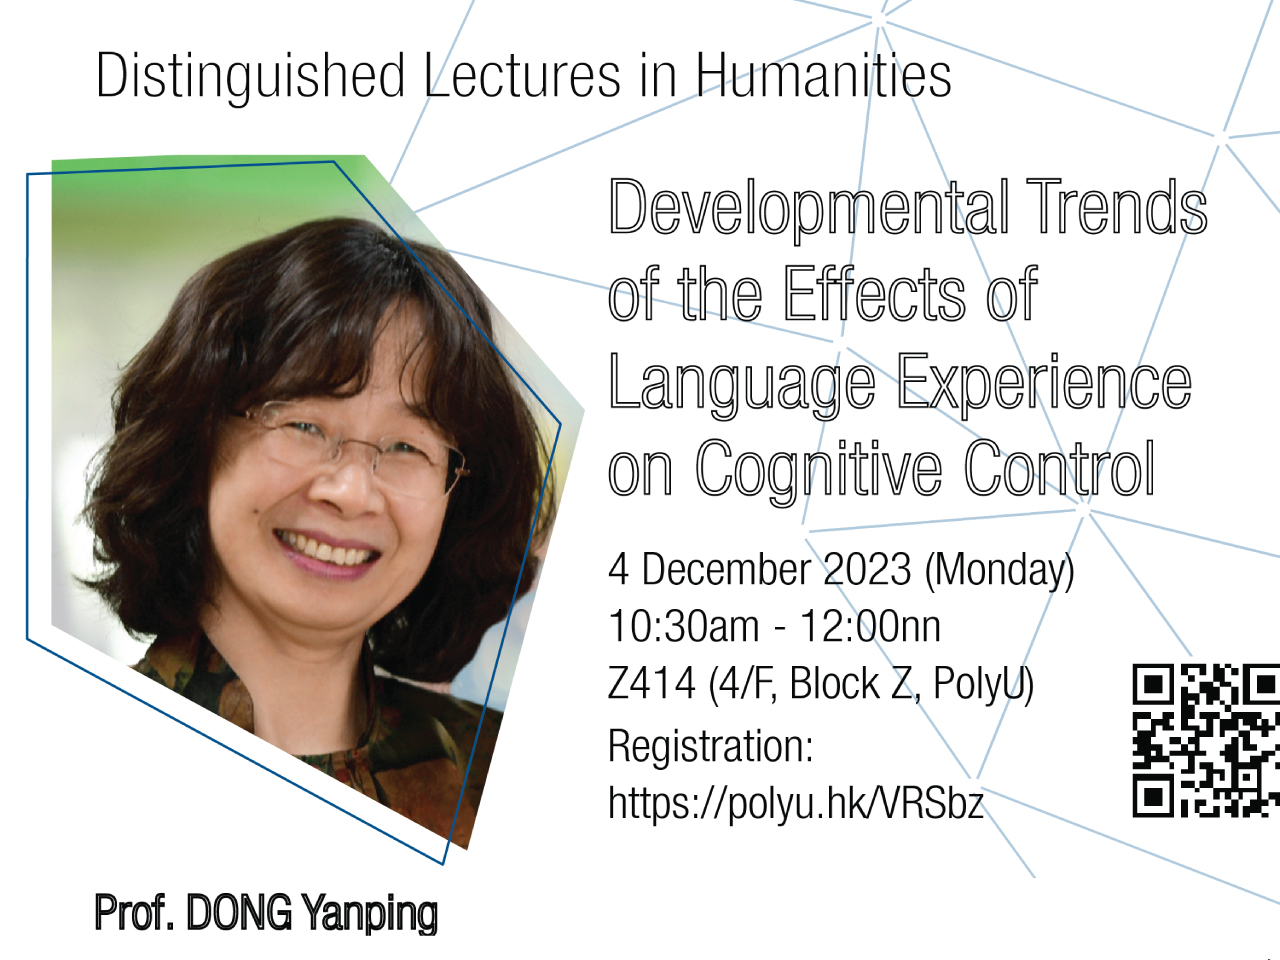 Distinguished lectures in humanities: developmental trends of the effects of language experience on cognitive control